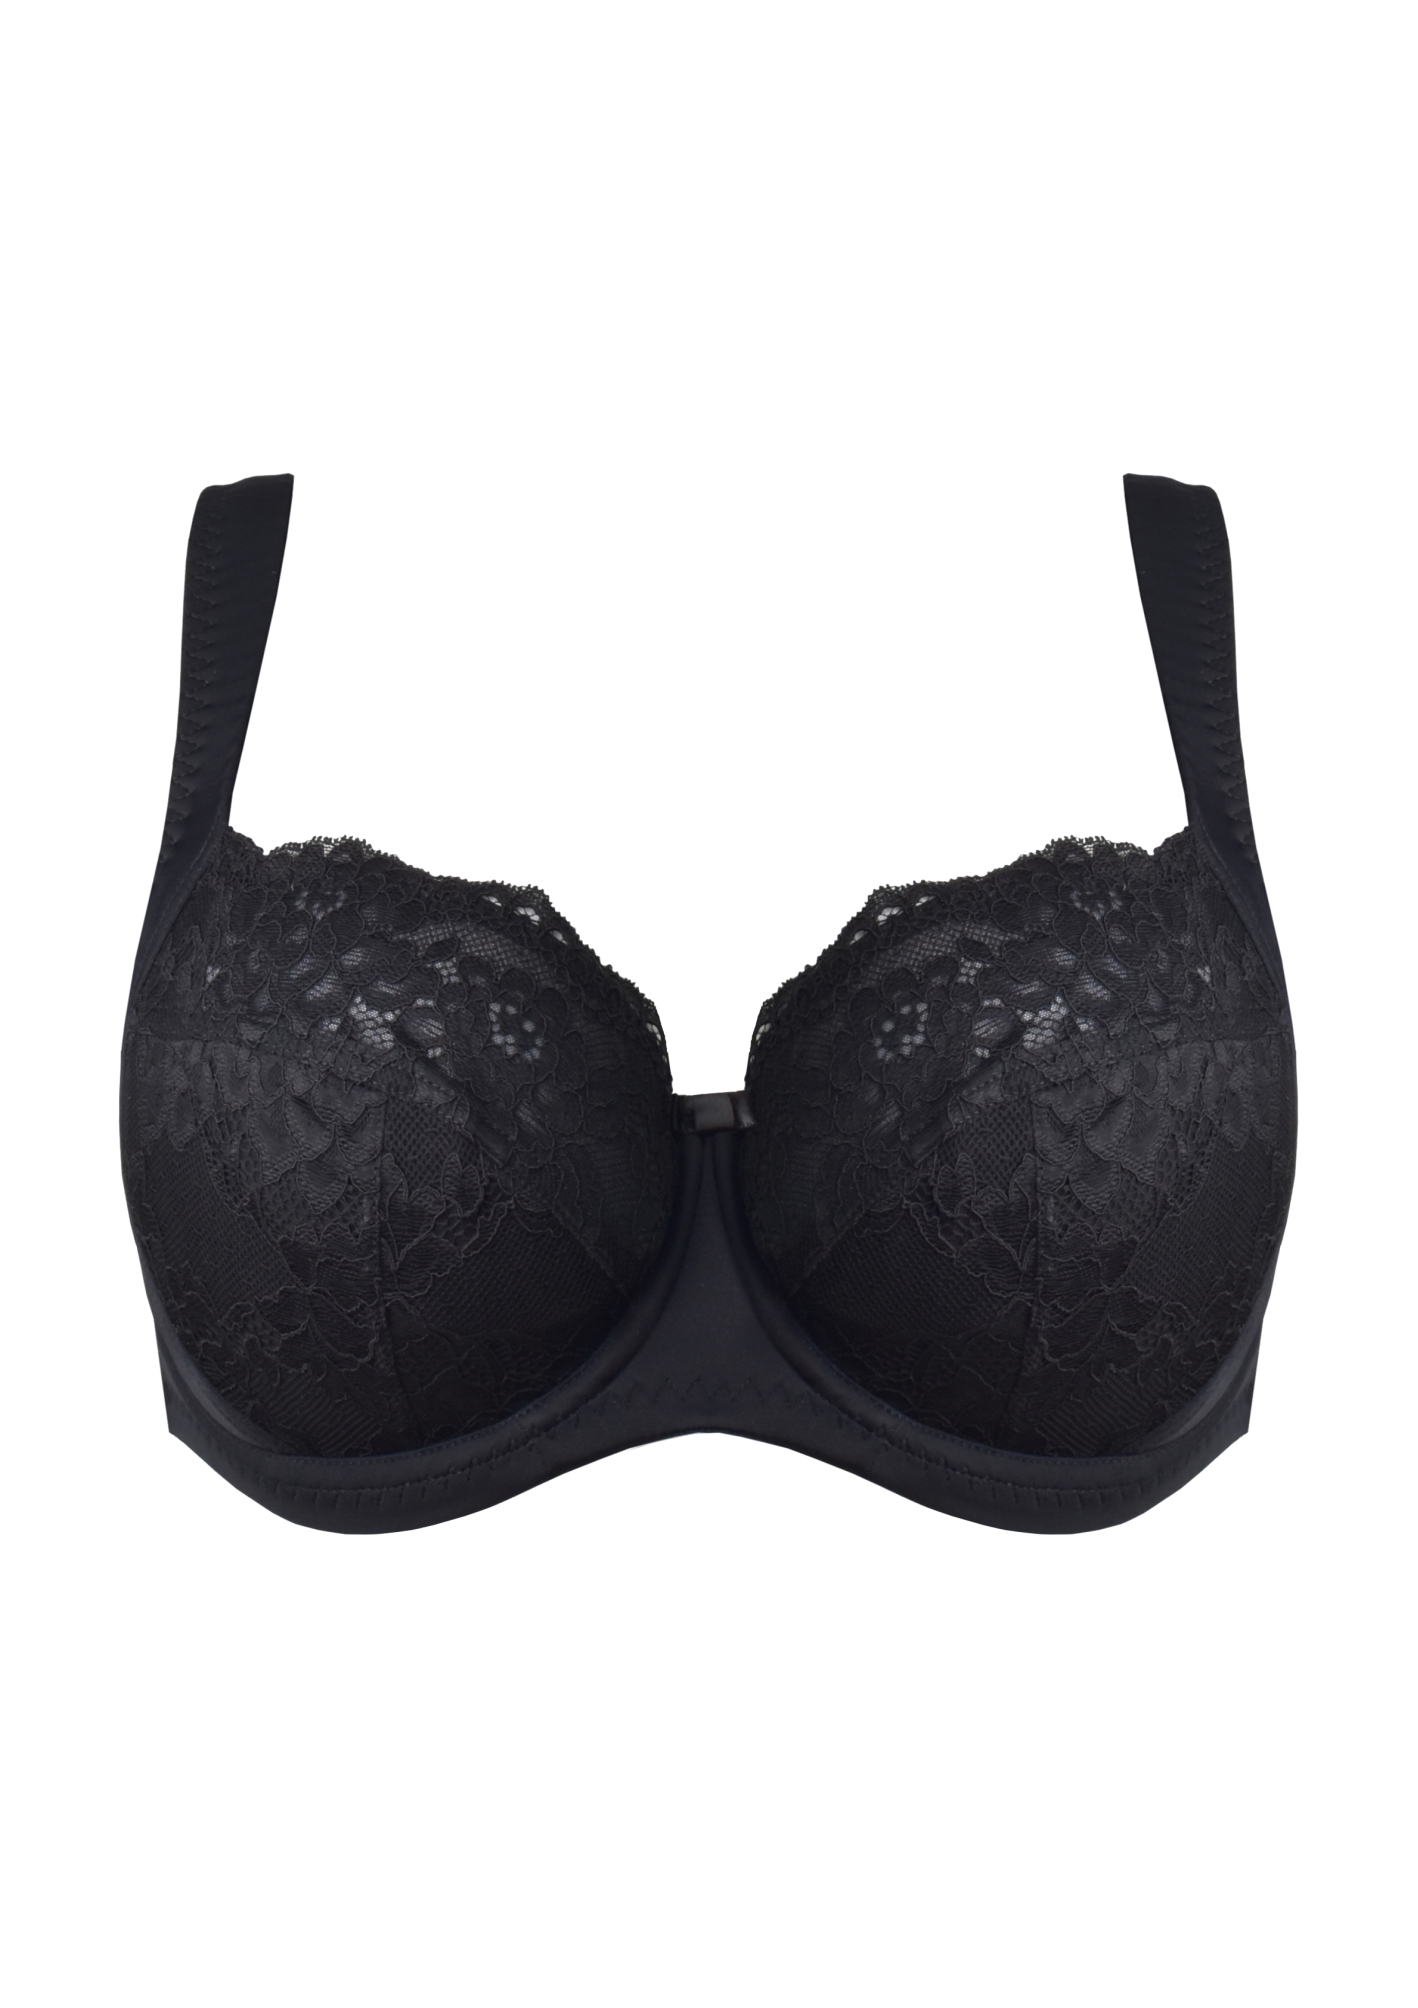 Fvwitlyh Brassiere Femme Women Lace Back Button Shaping Cup